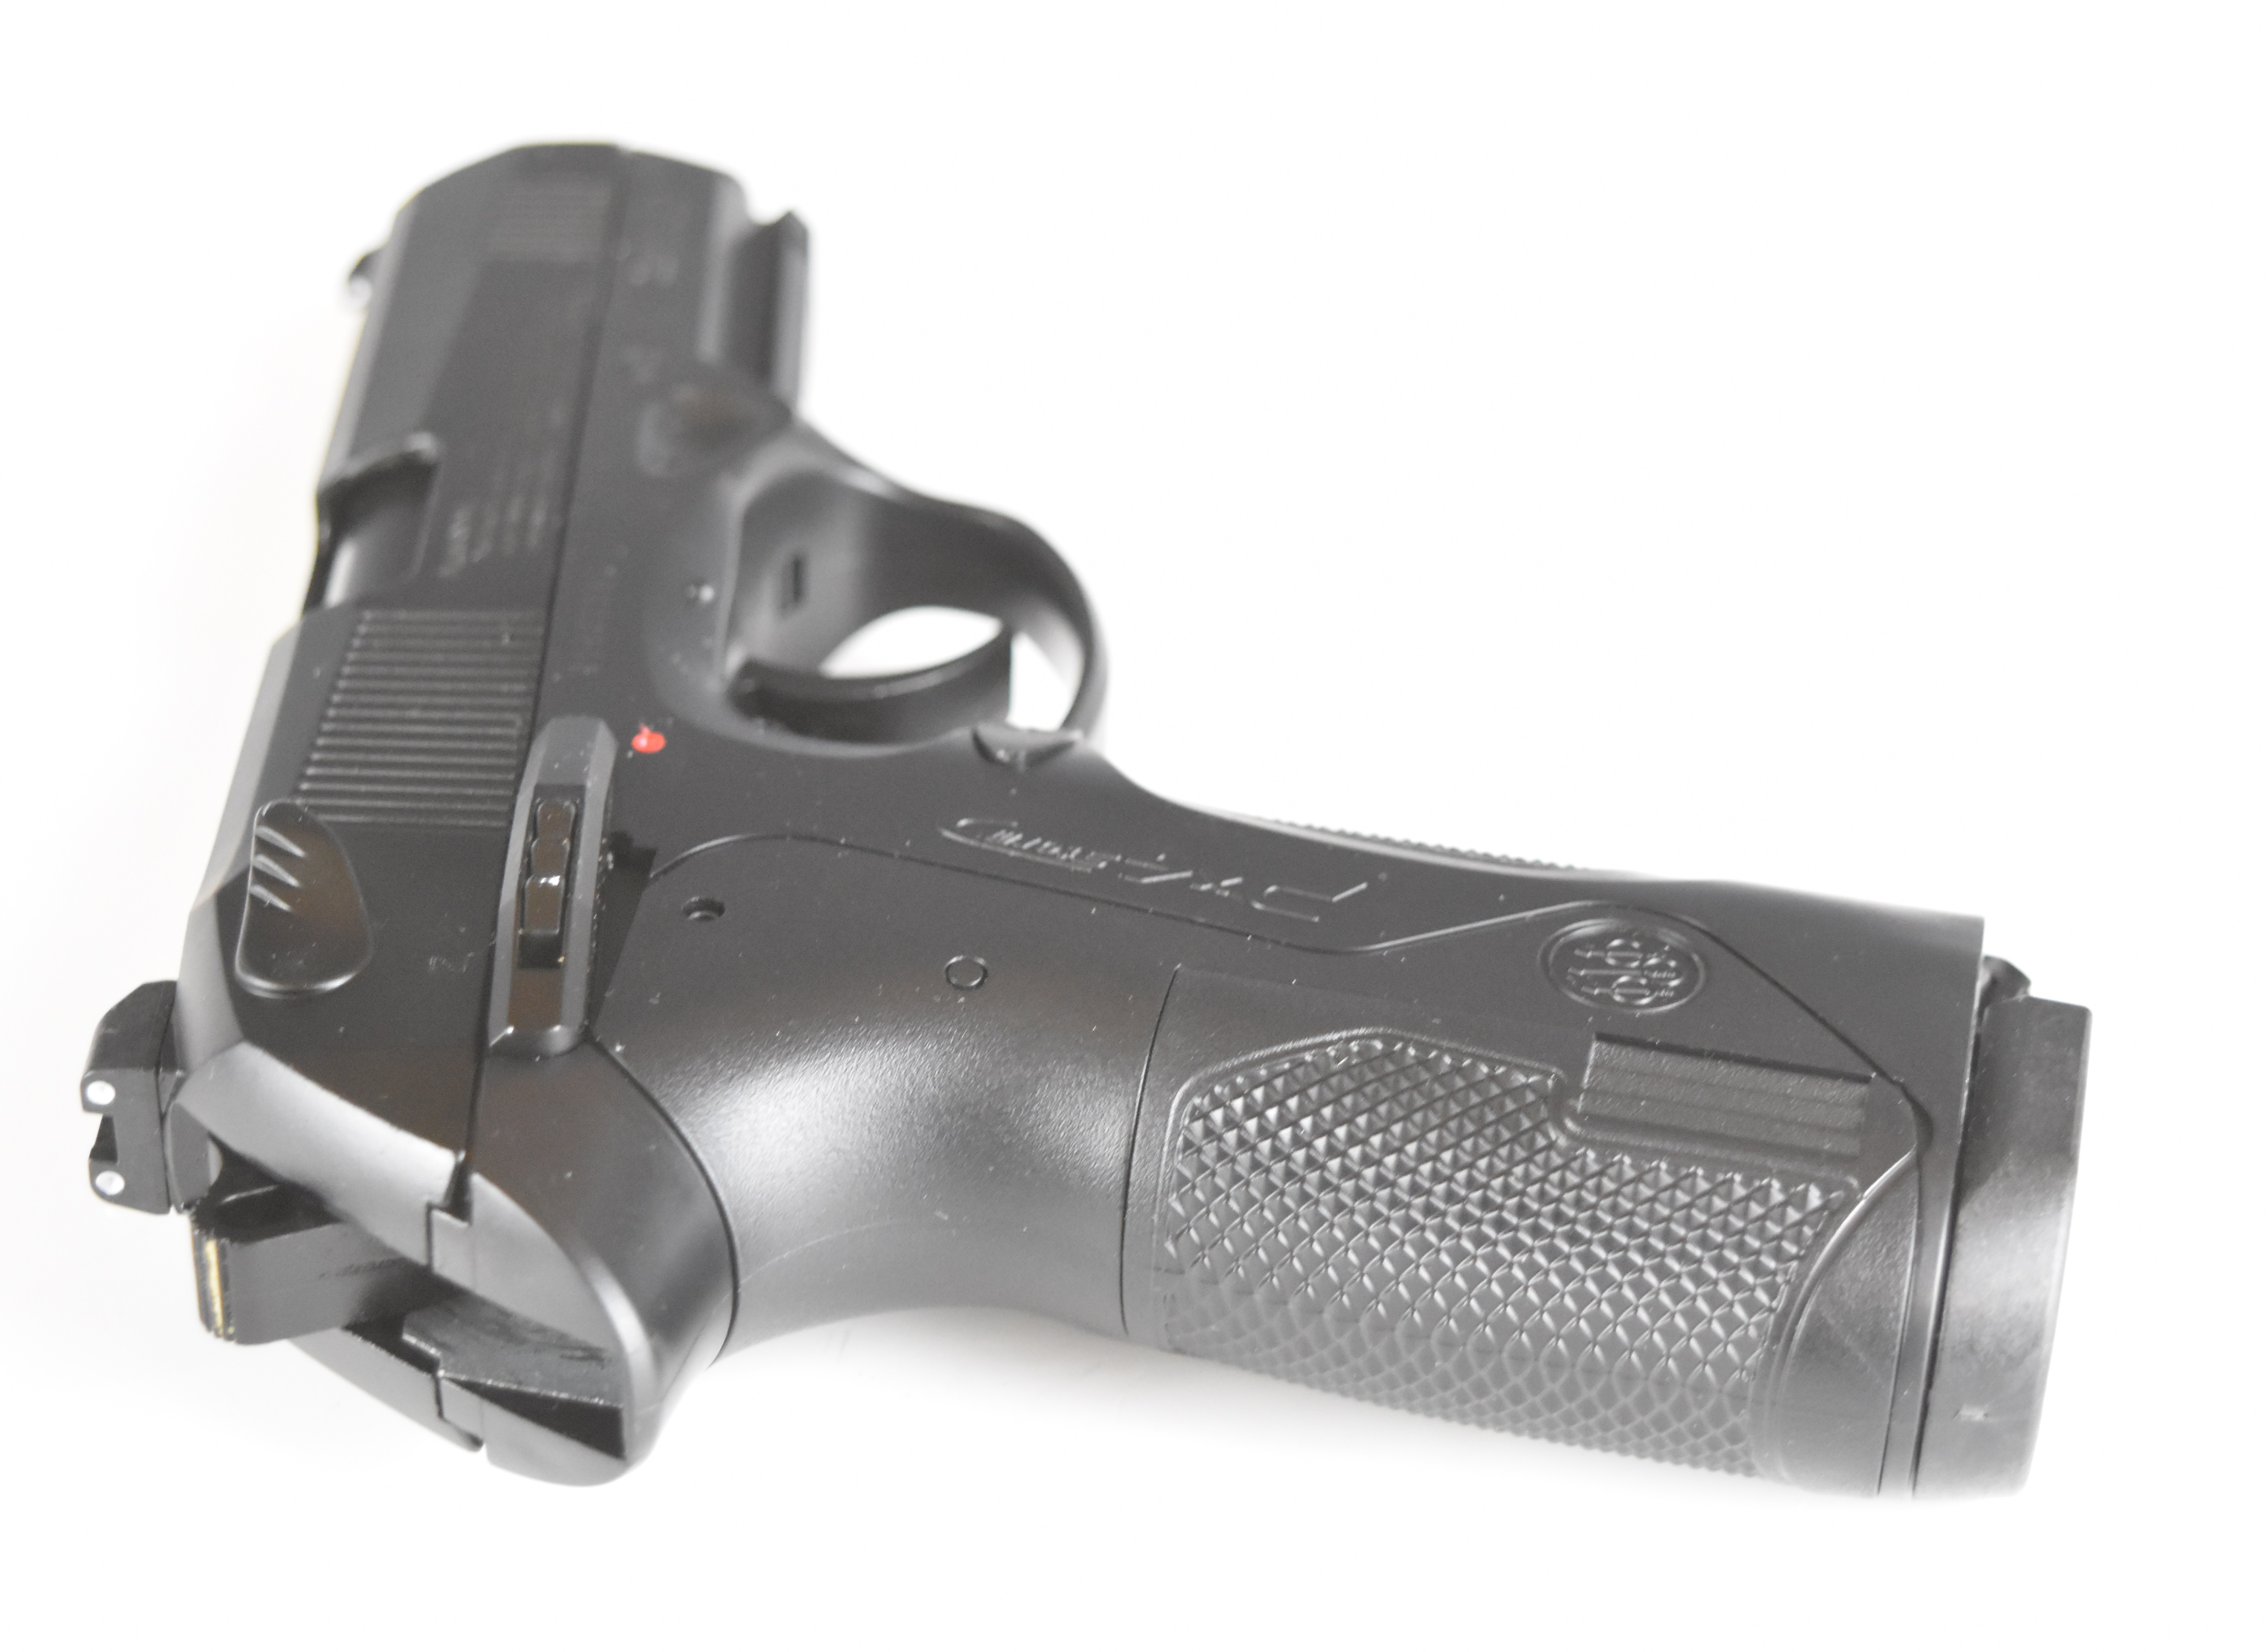 Umarex Beretta PX4 Storm .177 CO2 air pistol with textured grip and two 16 shot magazines, serial - Image 4 of 15